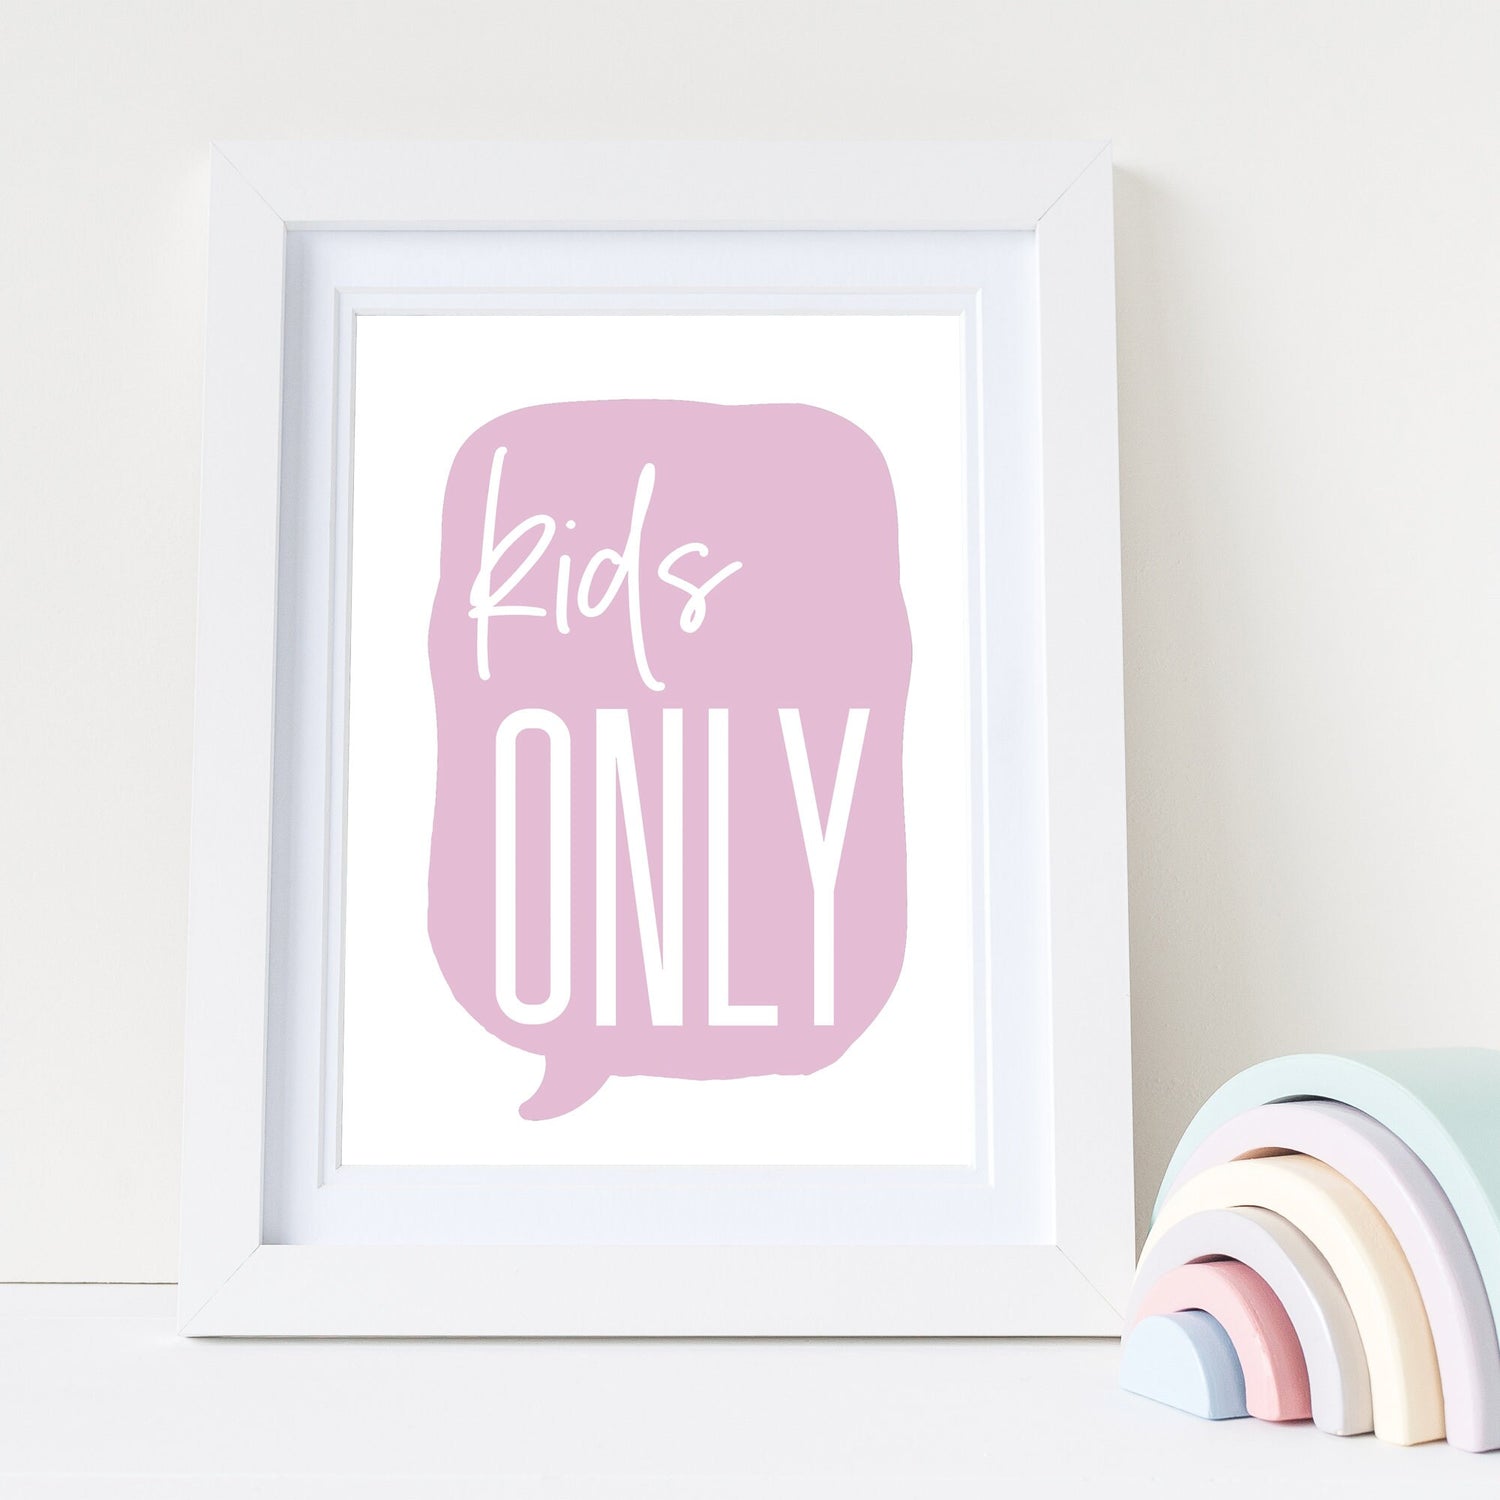 pink kids only Print